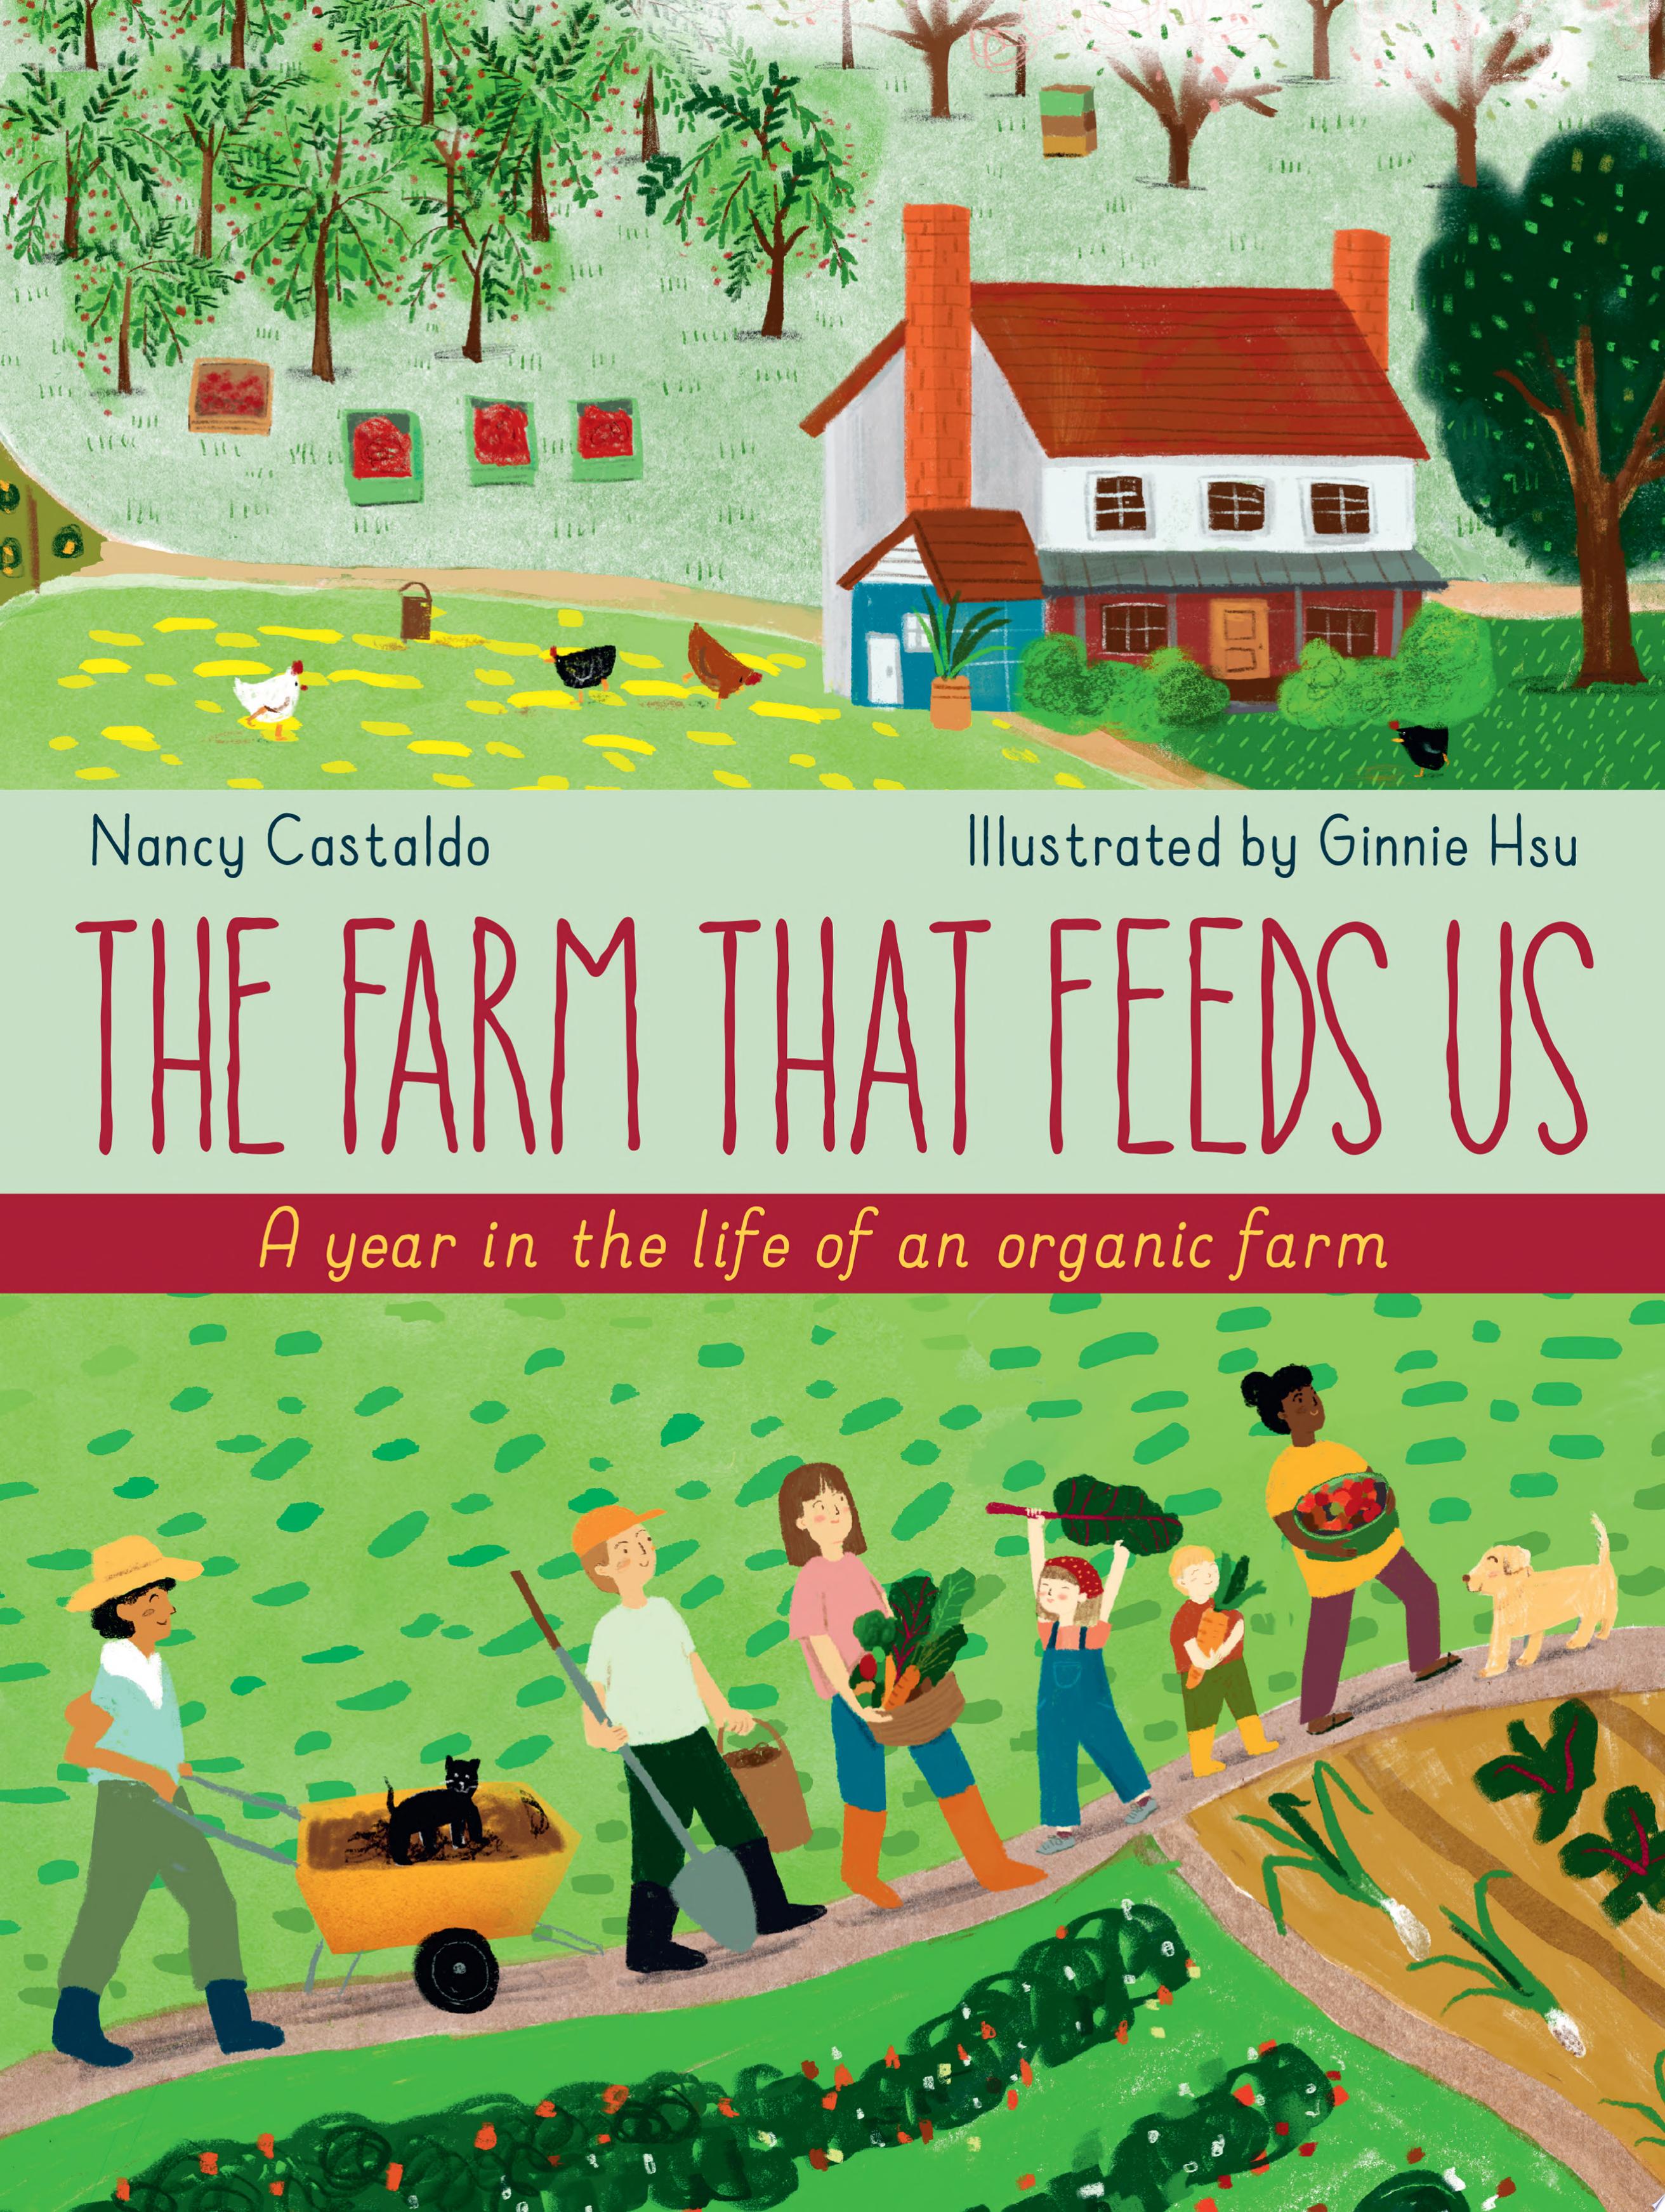 Image for "The Farm That Feeds Us"